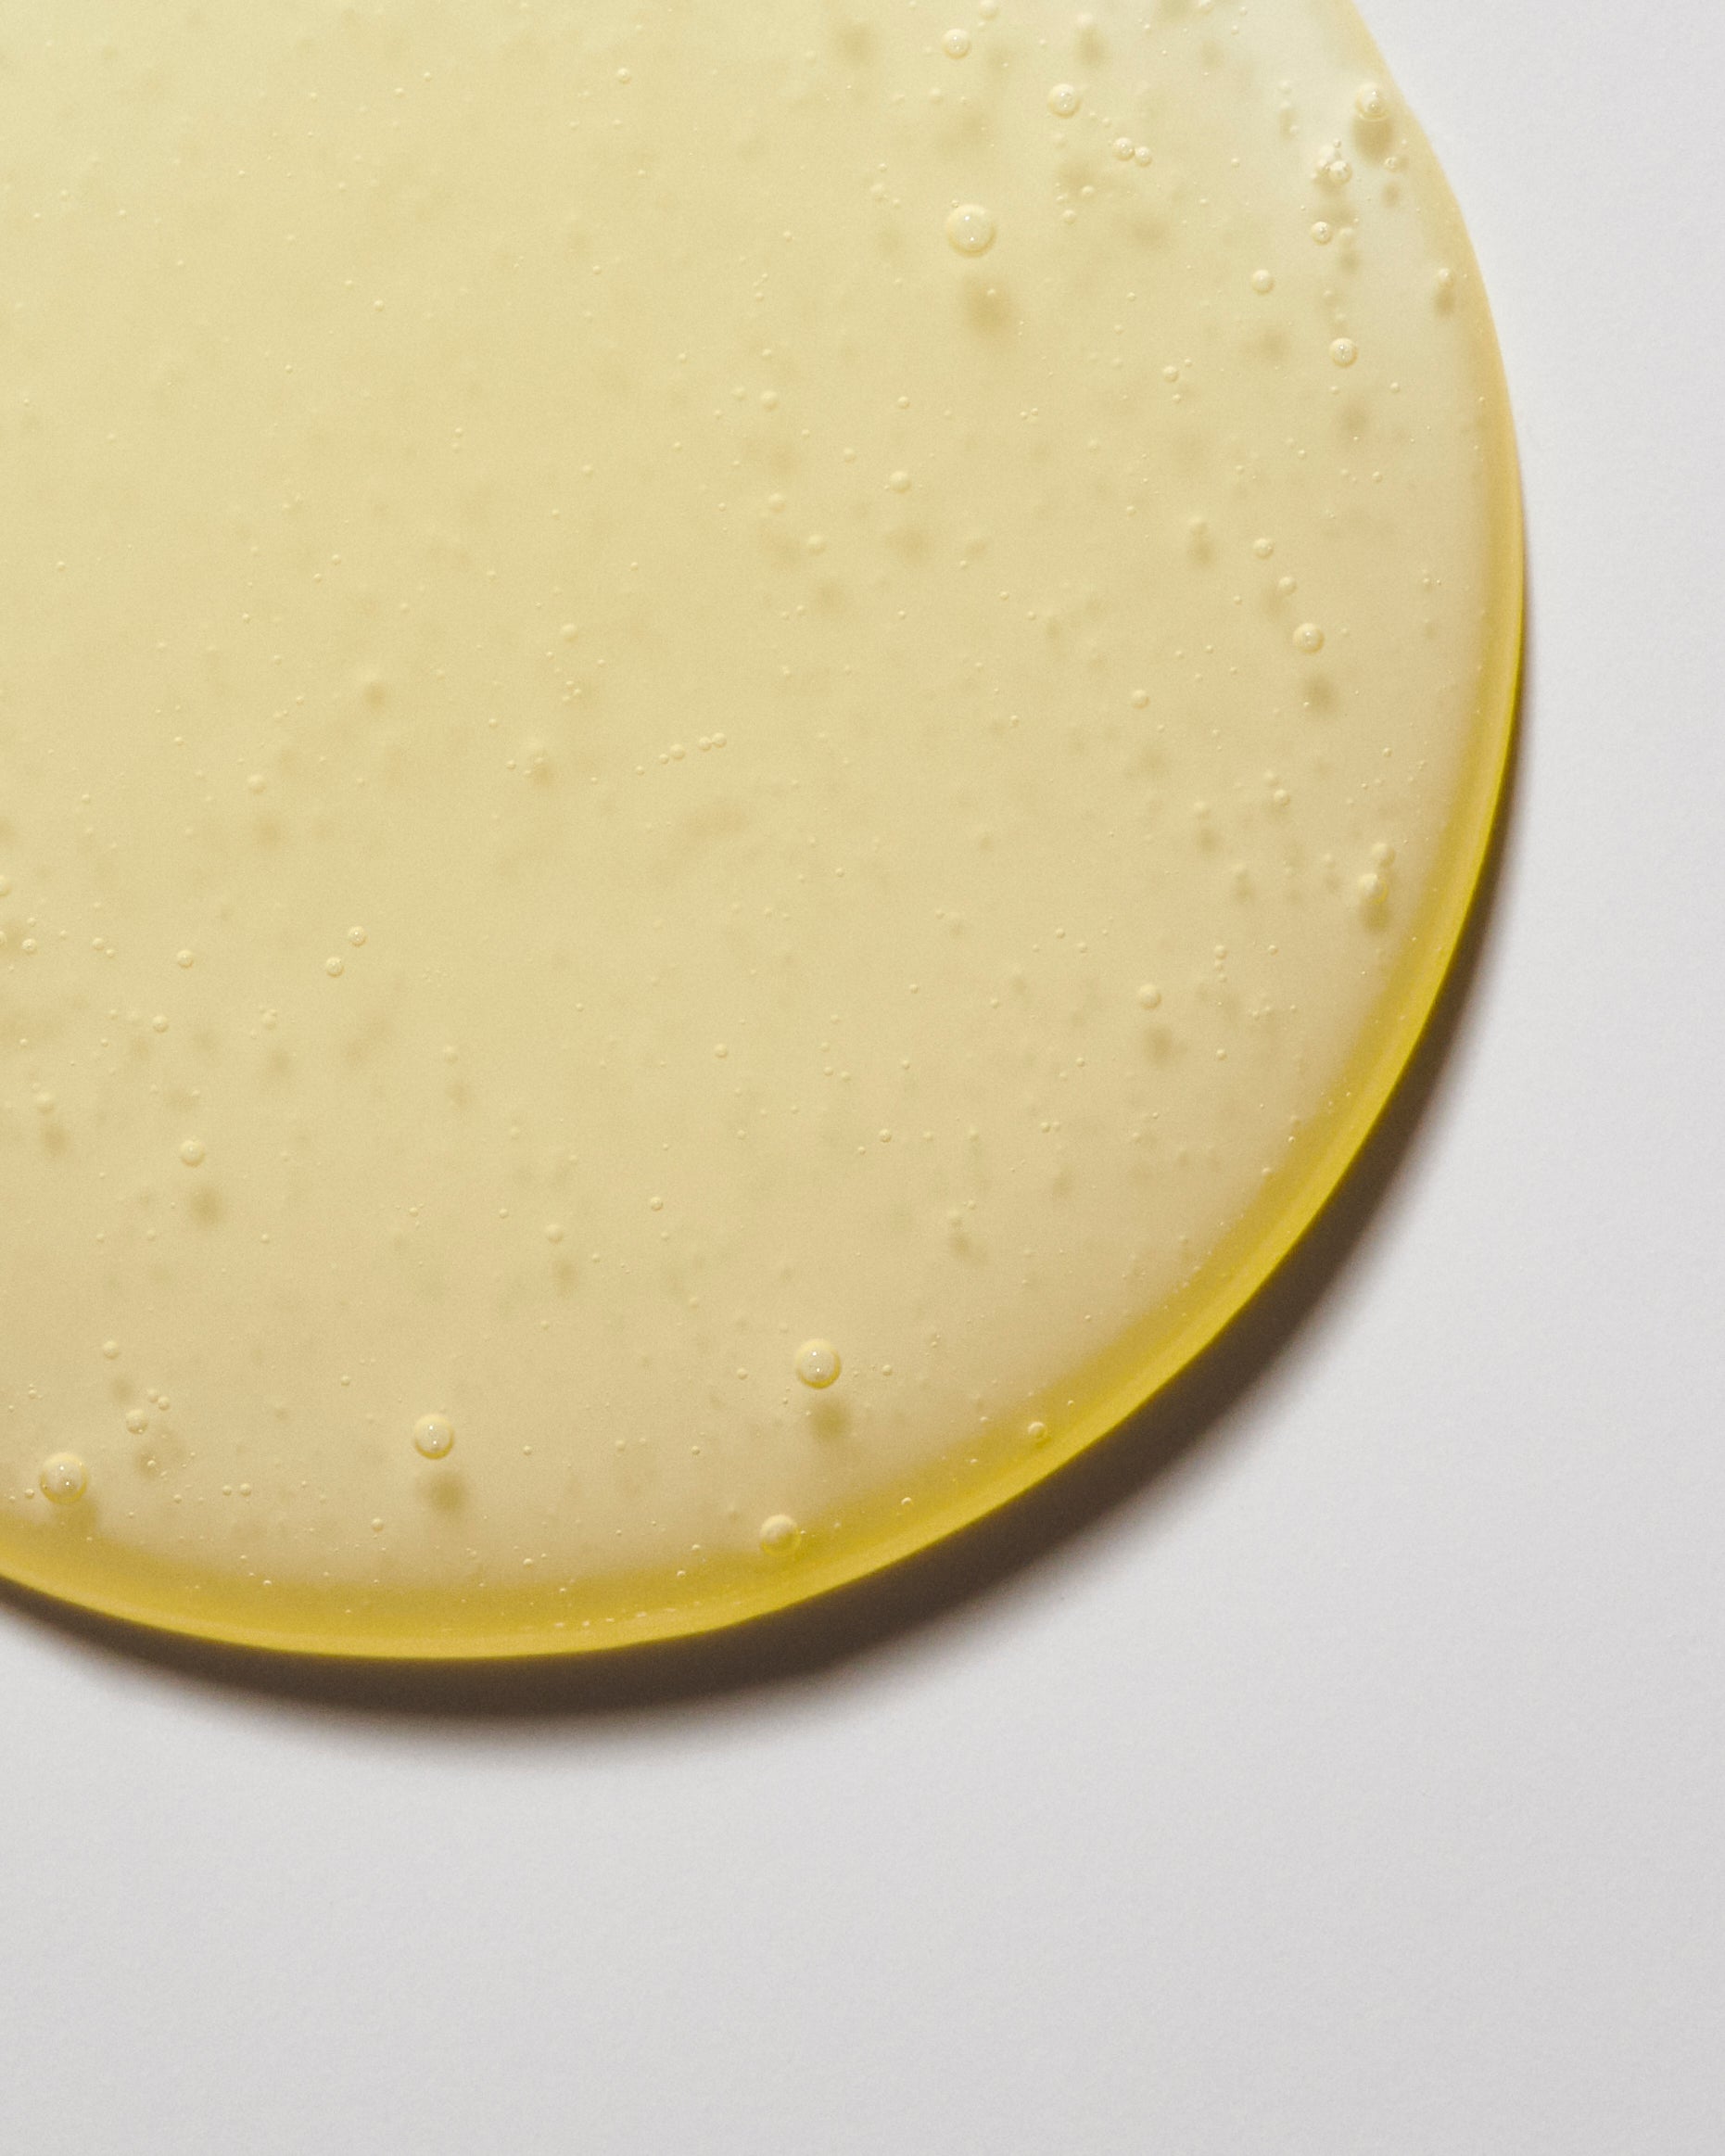 A circular puddle of pale yellow liquid, with a slightly glossy surface and small air bubbles scattered throughout, resembling Deeper Dive Moisturizer by Freaks of Nature Skincare, rests on a white background.